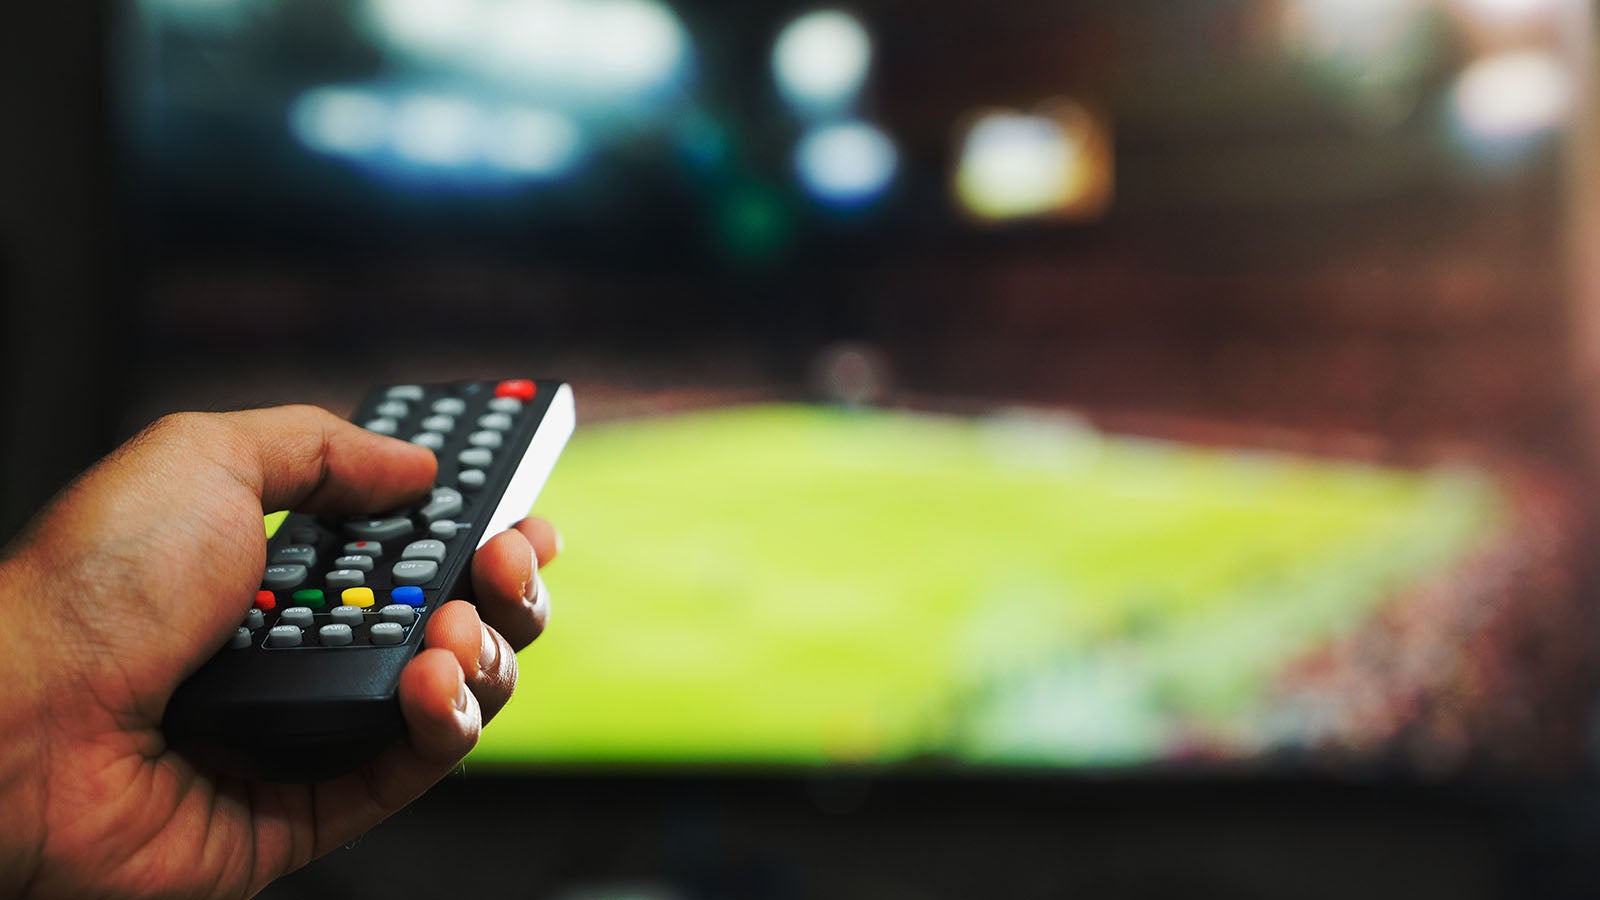 Whats the cheapest way to watch football on TV?